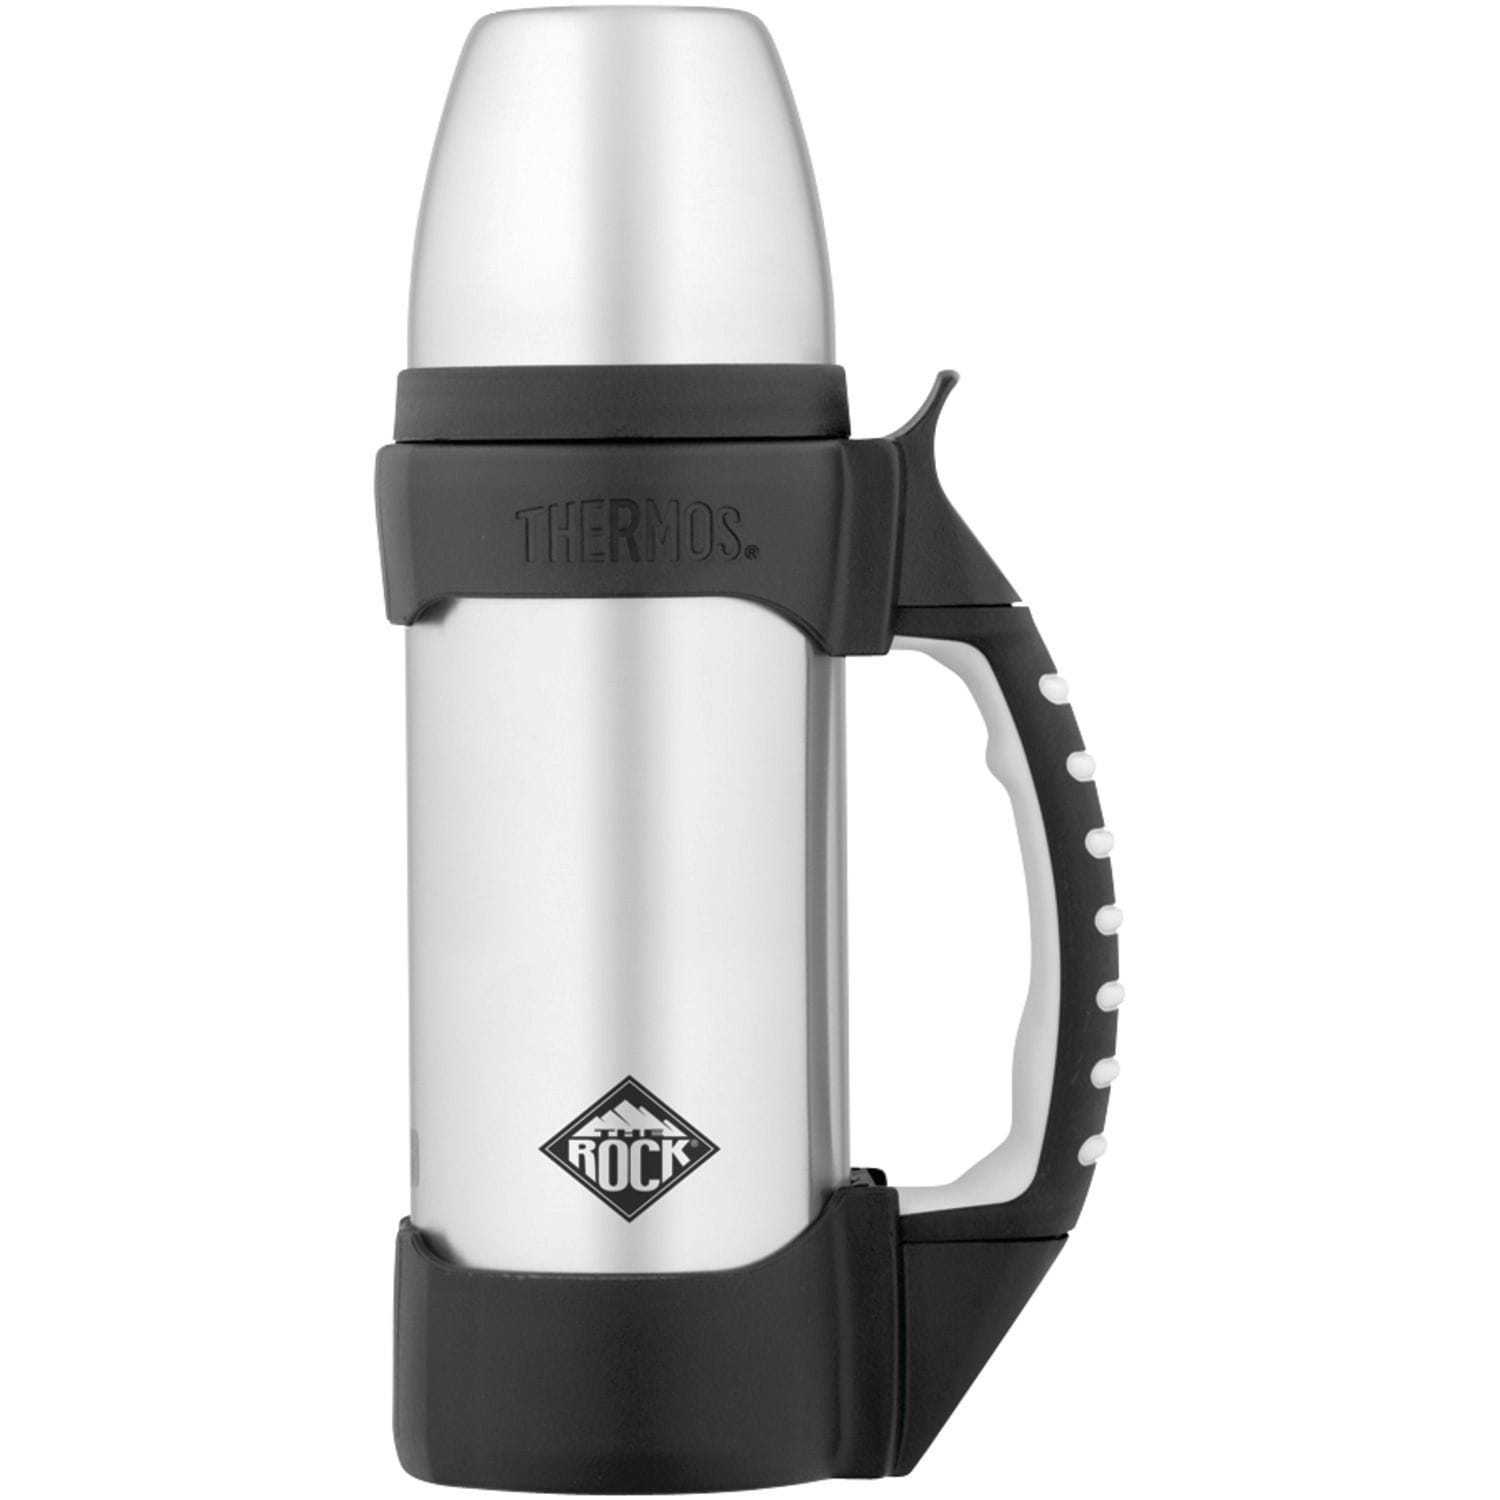 Thermos Camping & Outdoor : Canteen Thermos 1.1 qt Stainless Steel Beverage Bottle